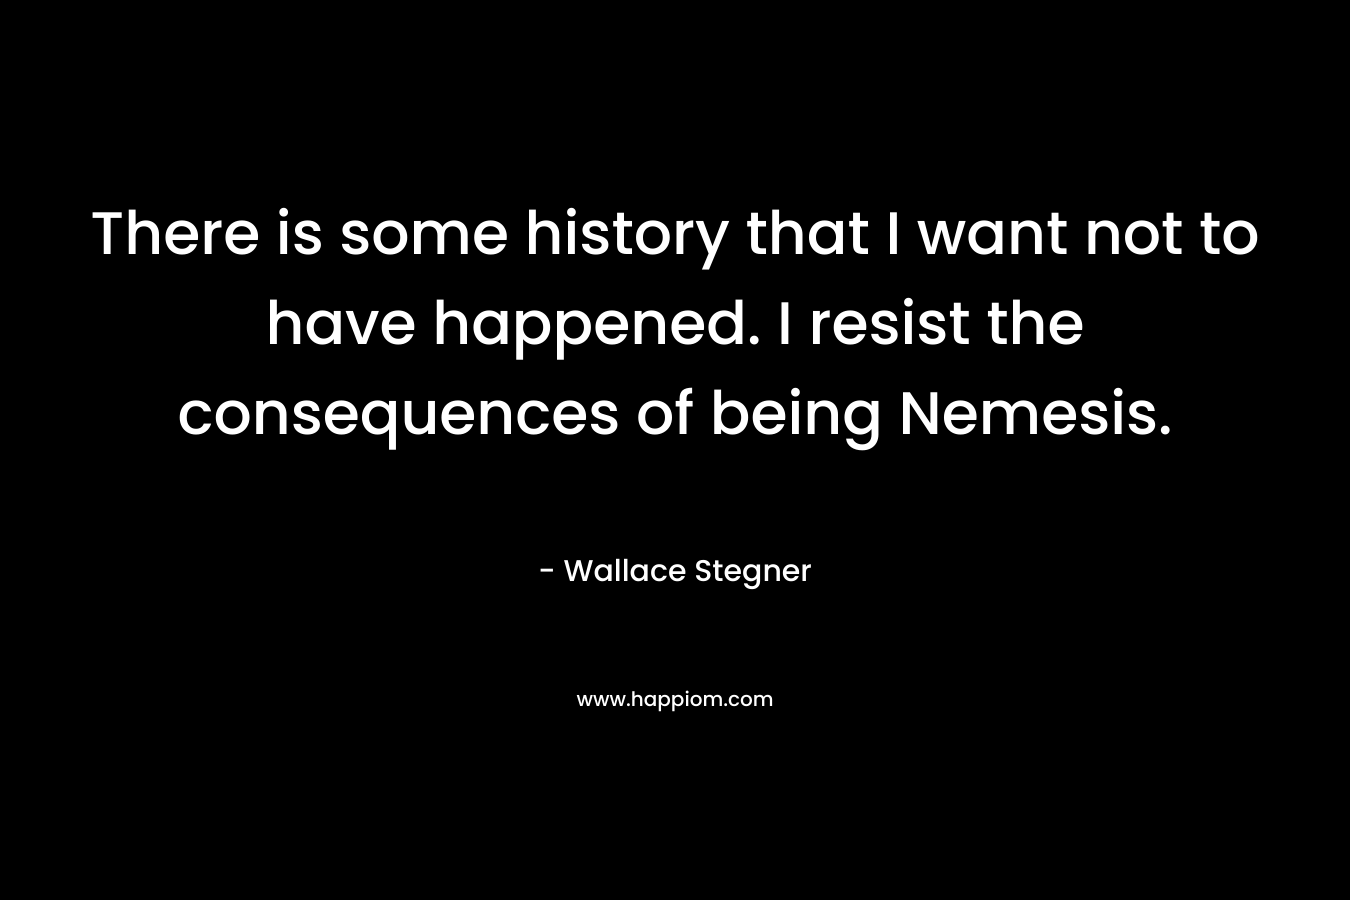 There is some history that I want not to have happened. I resist the consequences of being Nemesis.